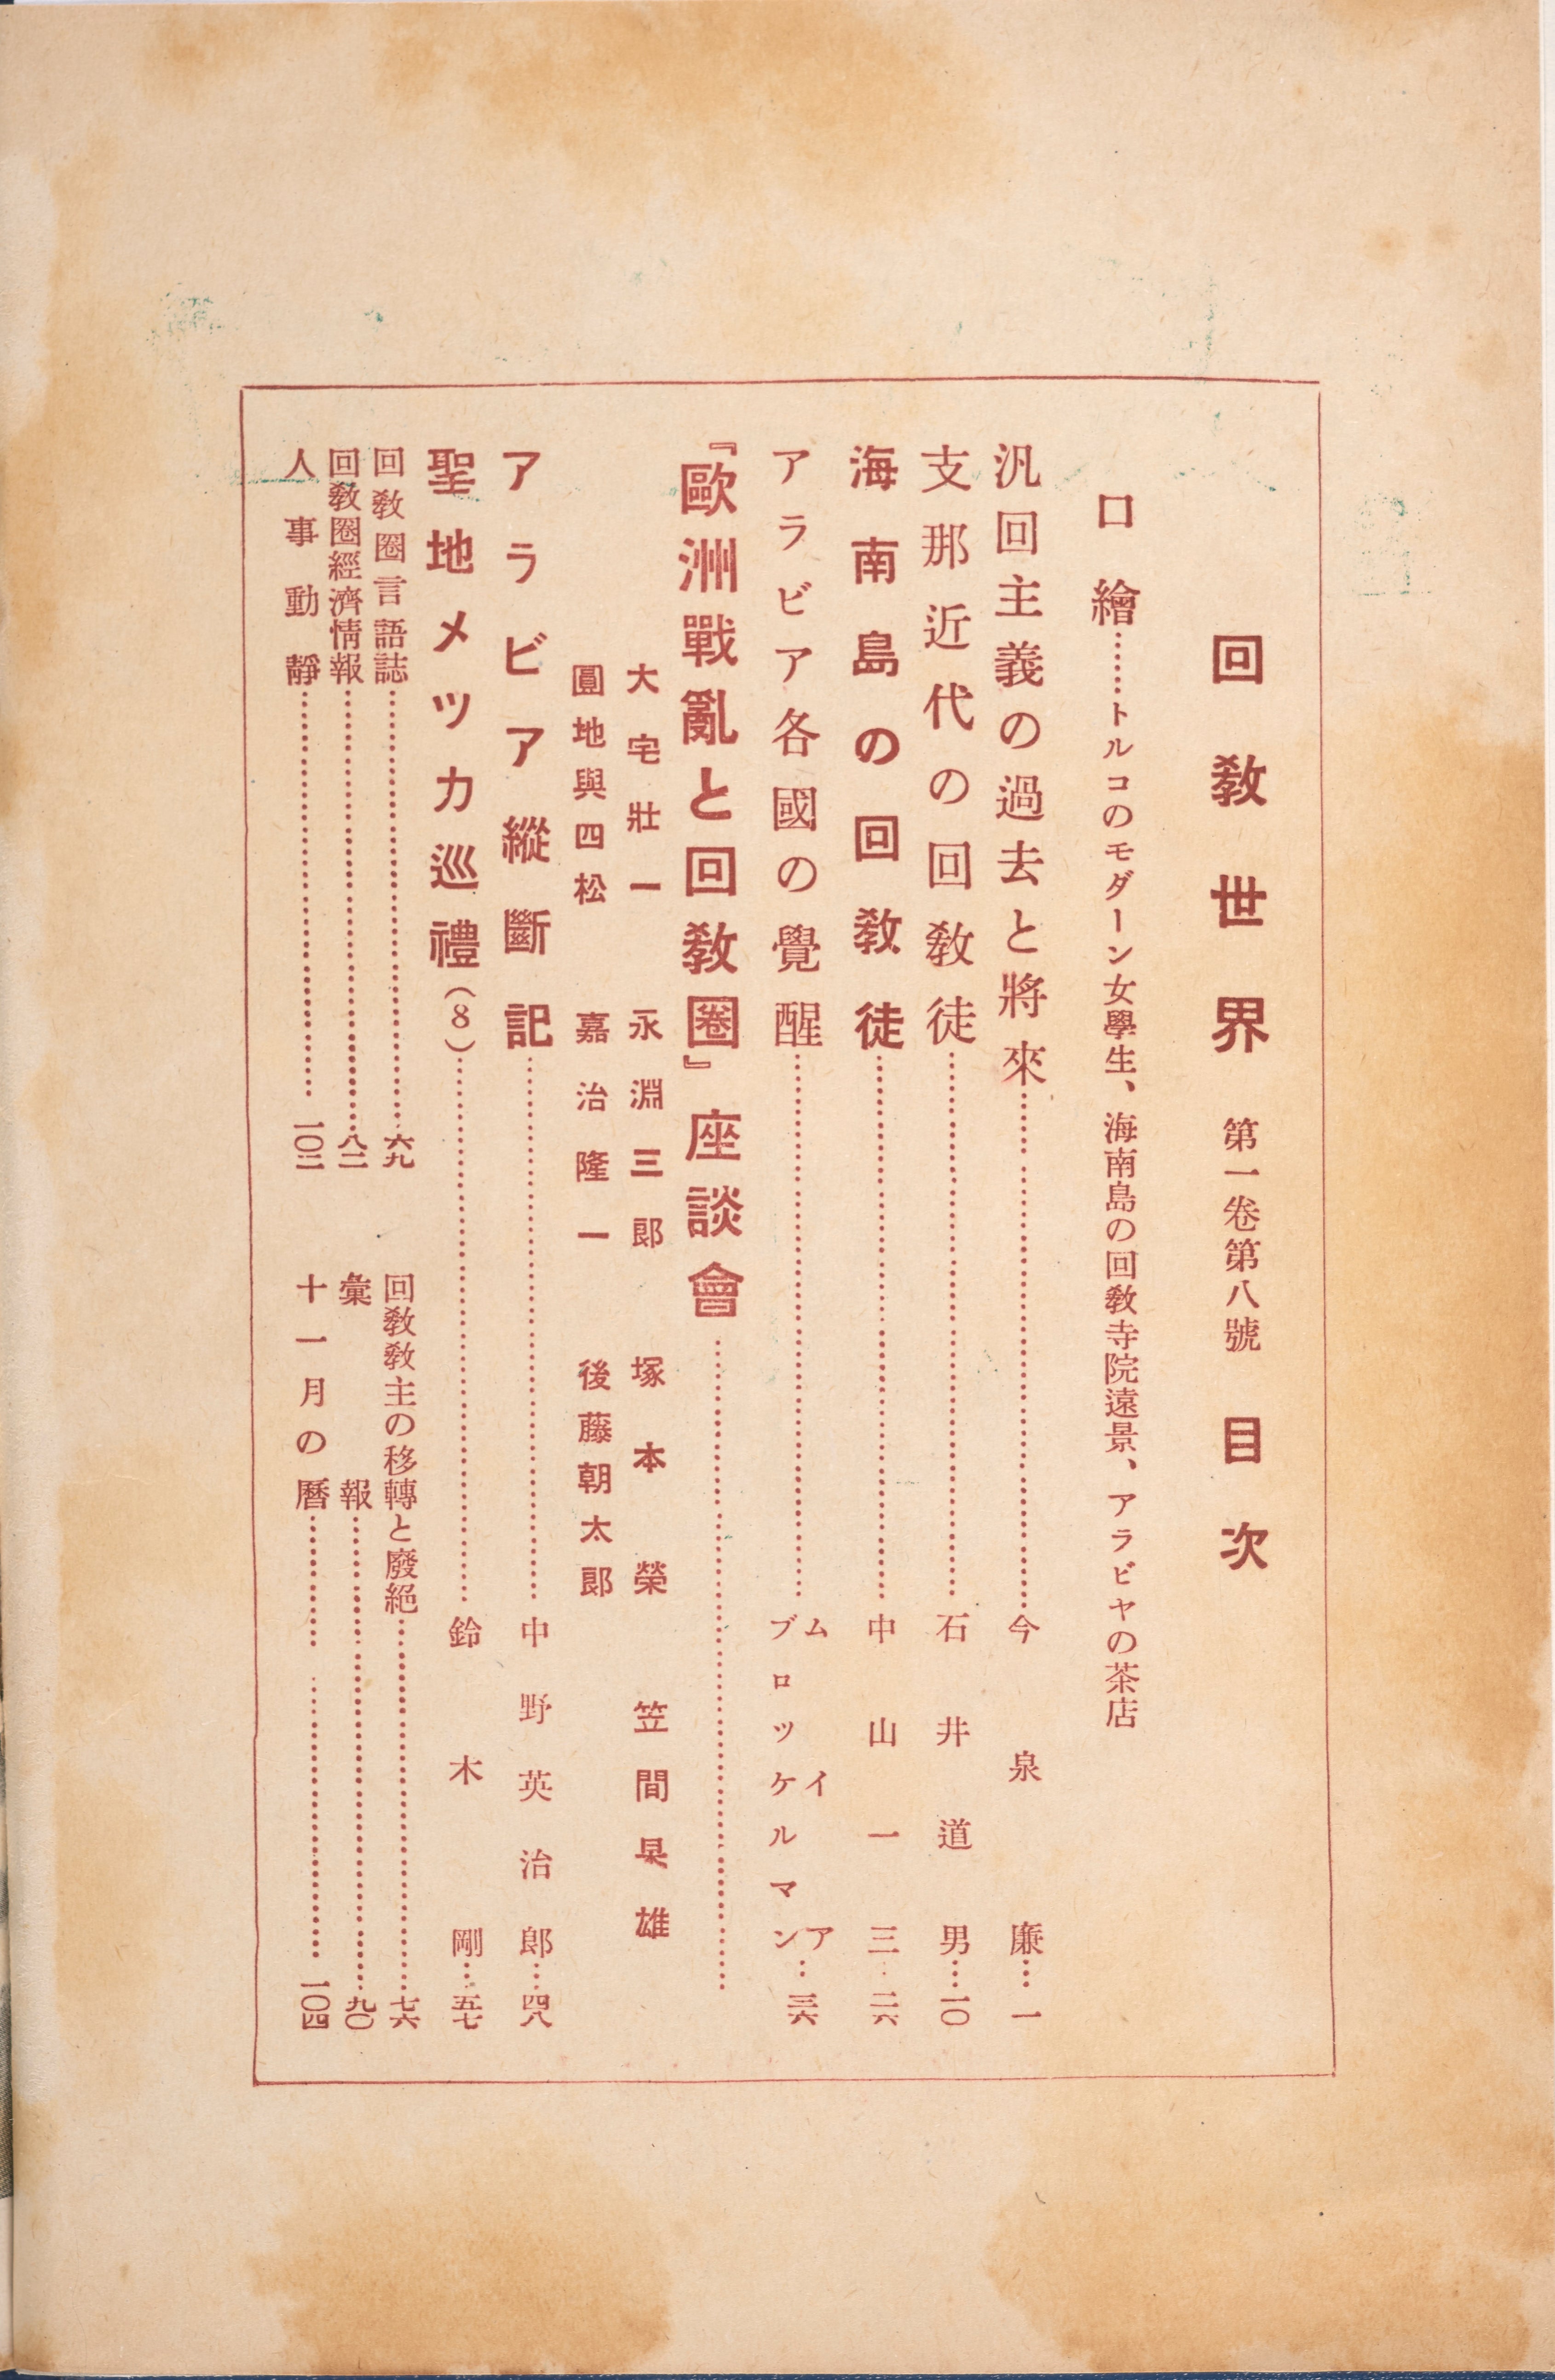 A yellowing page is filled with Japanese text written vertically in red ink and bordered by a red rectangle. 